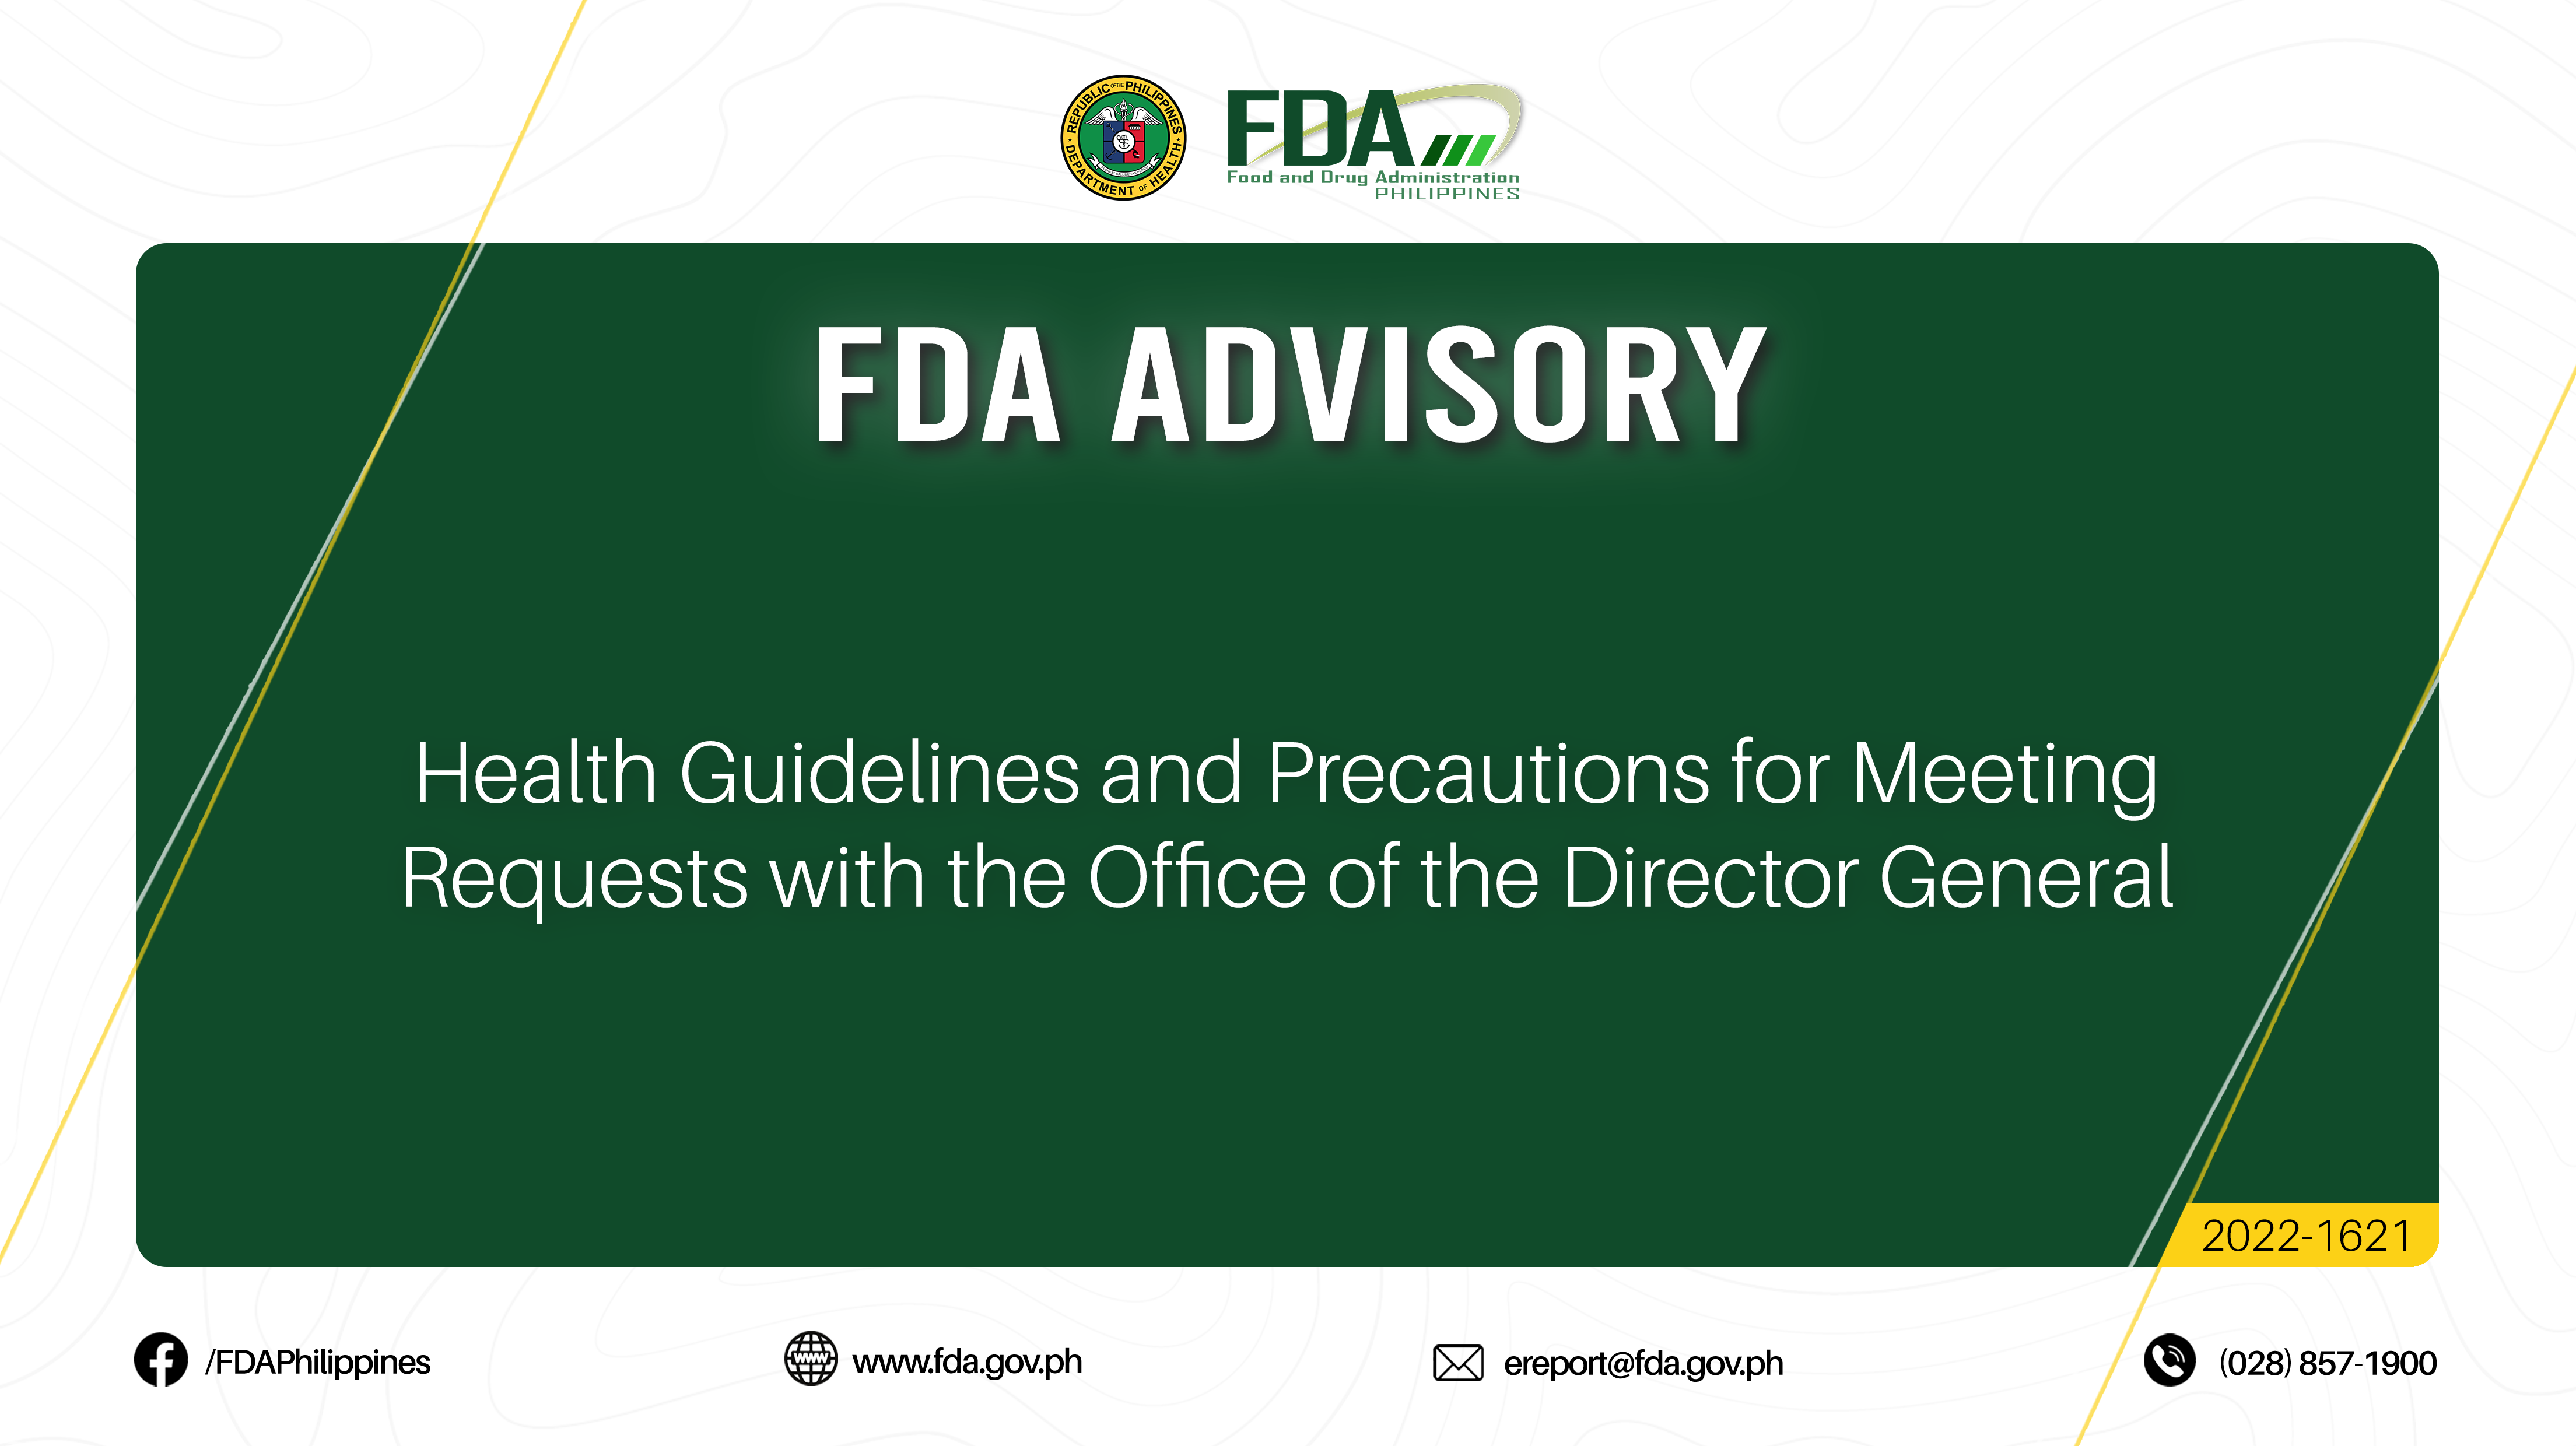 FDA Advisory No.2022-1621 || Health Guidelines and Precautions for Meeting Requests with the Office of the Director General